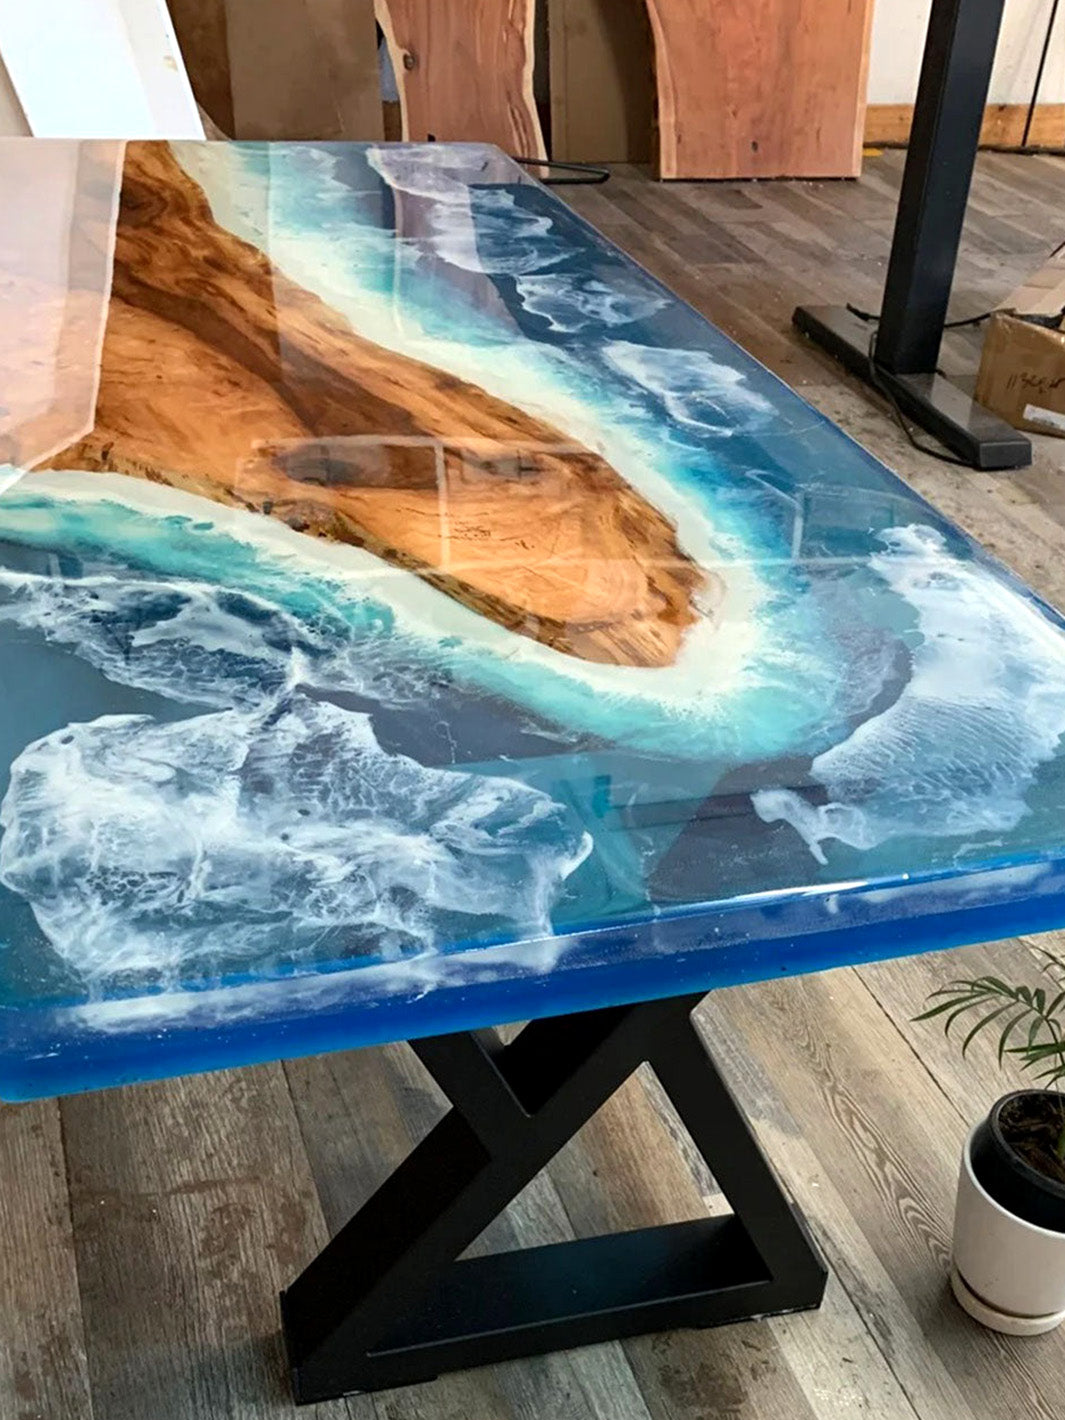 Handmade Live Edge Ocean Waves Themed Epoxy Coffee Table DaddyO's Kitchen & Dining Room Tables DAD0509-7